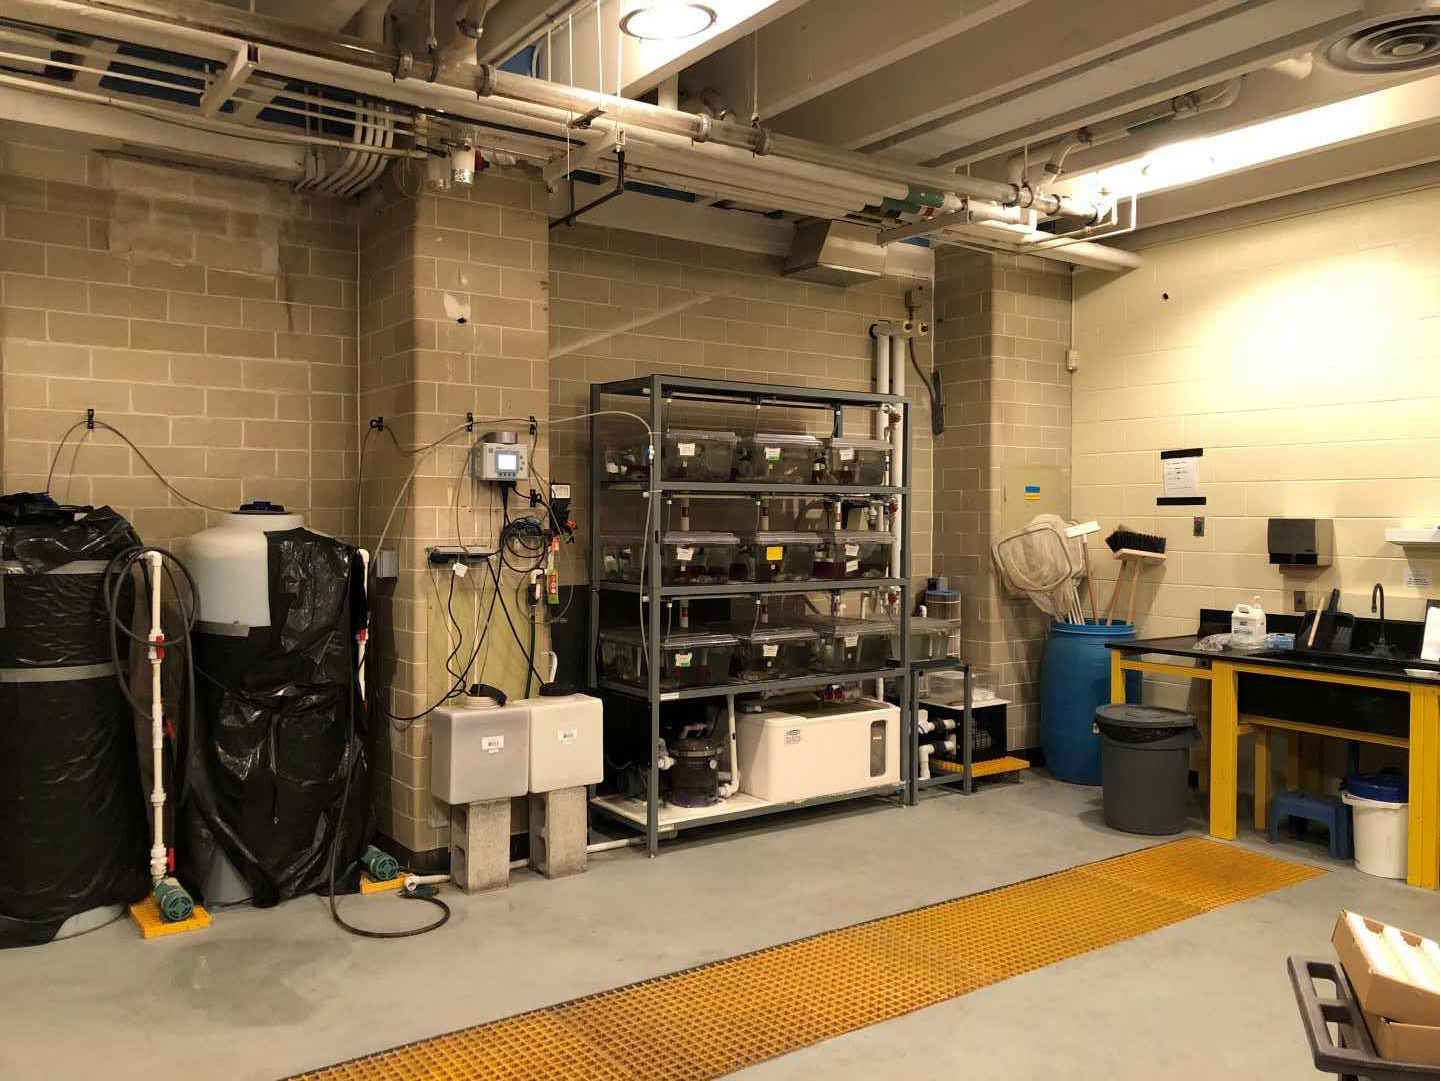 Room within the aquatics facility with equipment